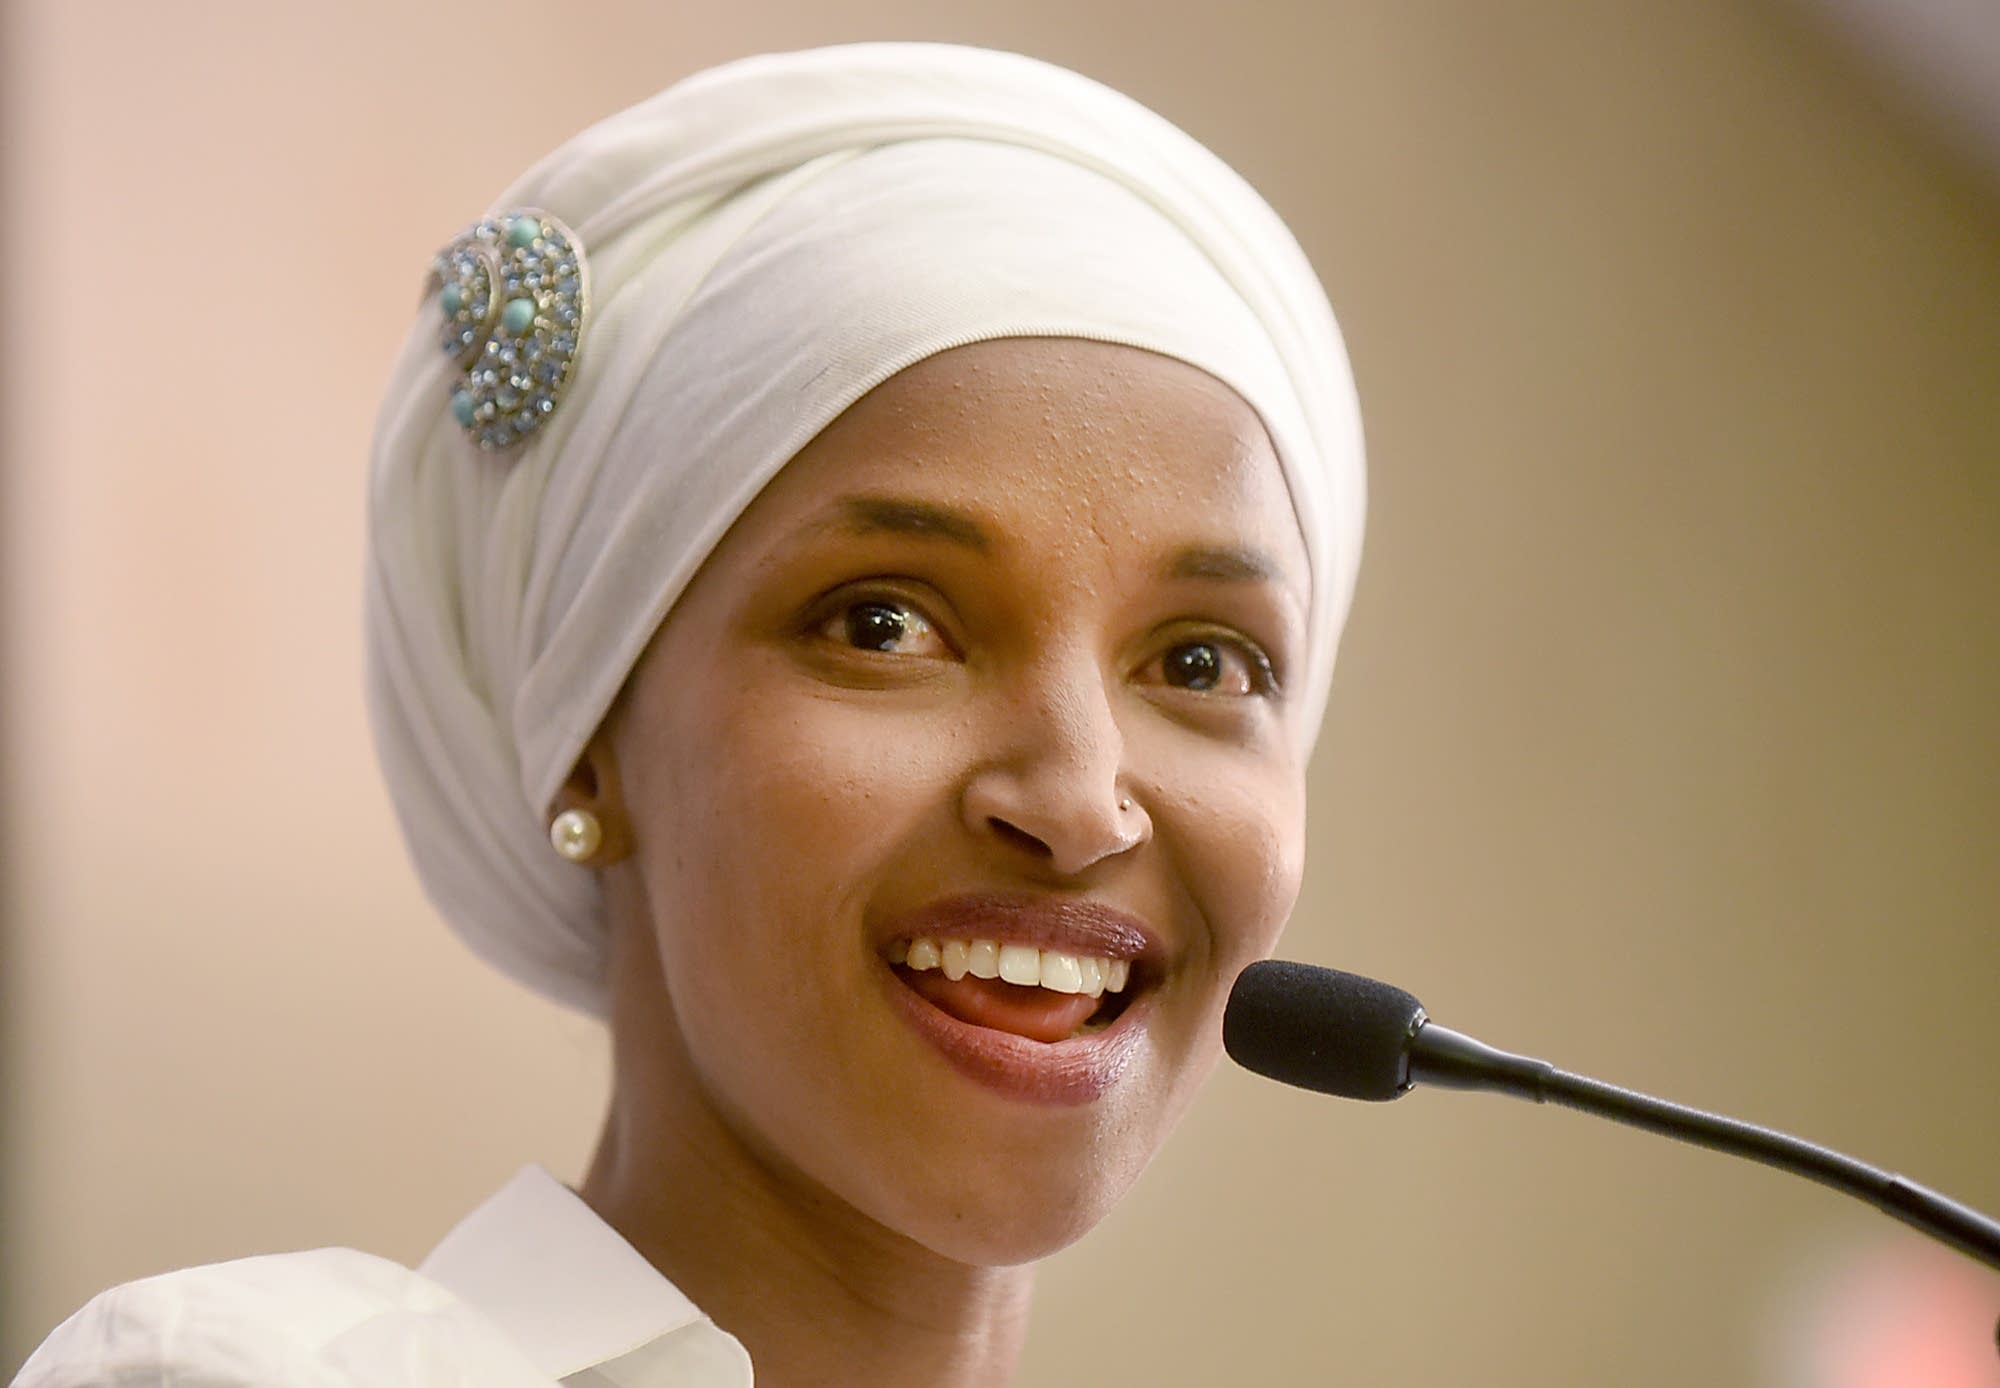 Loomer, Wohl And Ali Expose The Dirt On Ilhan Omar’s Brother Marriage At CPAC